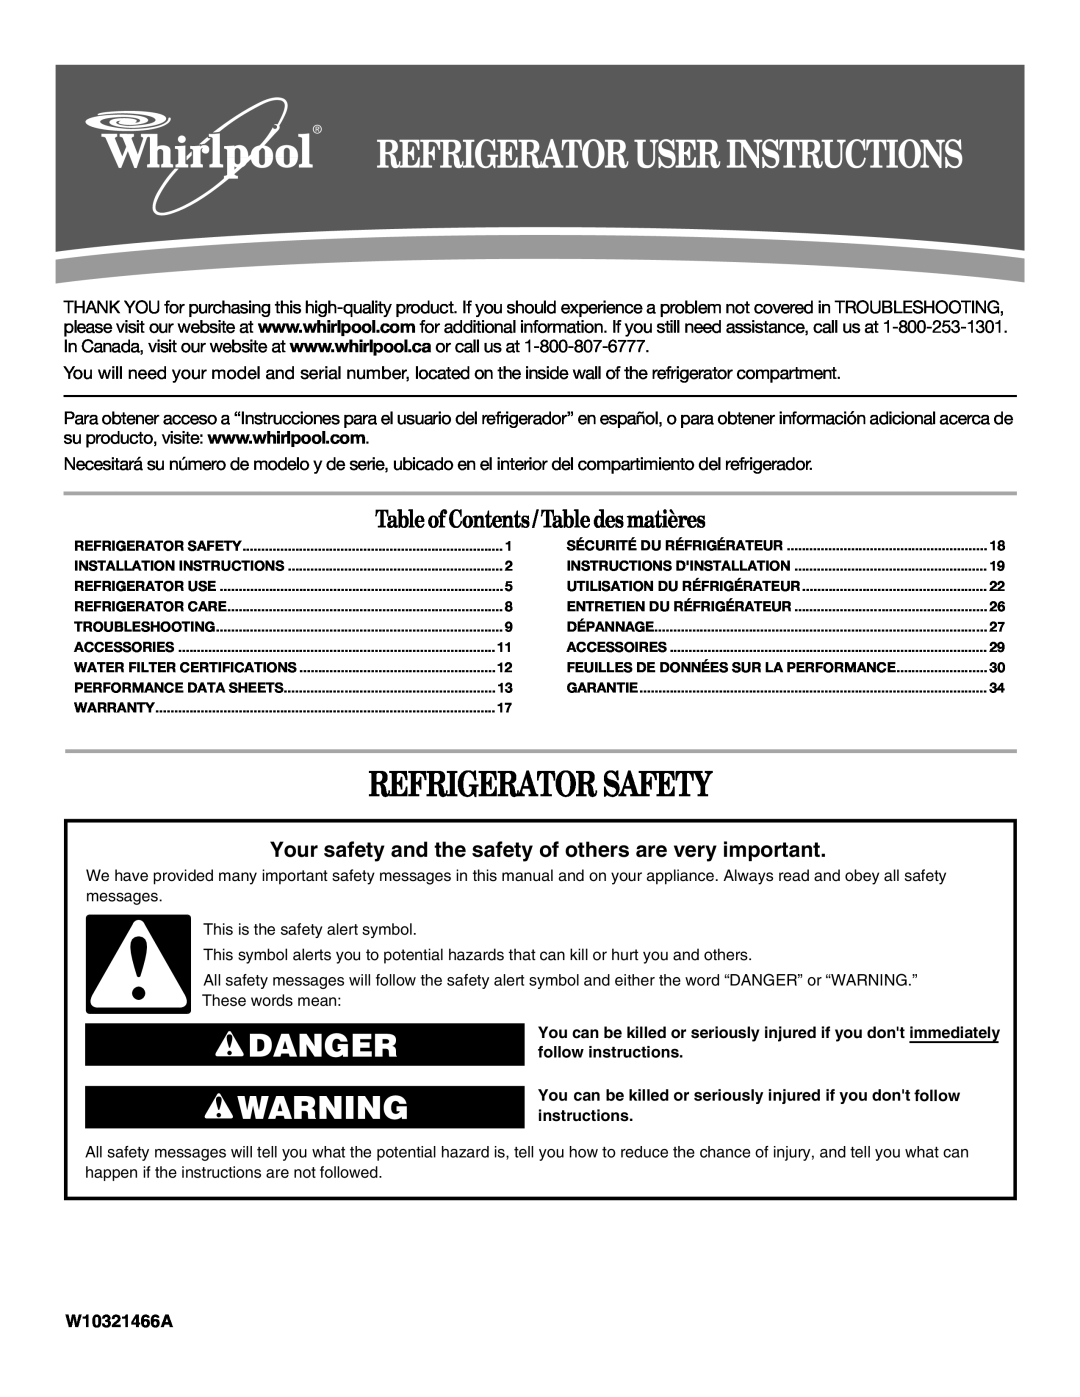 Whirlpool ED5FVGXWS07 installation instructions Refrigerator Safety, Danger, Table of Contents / Table des matières 